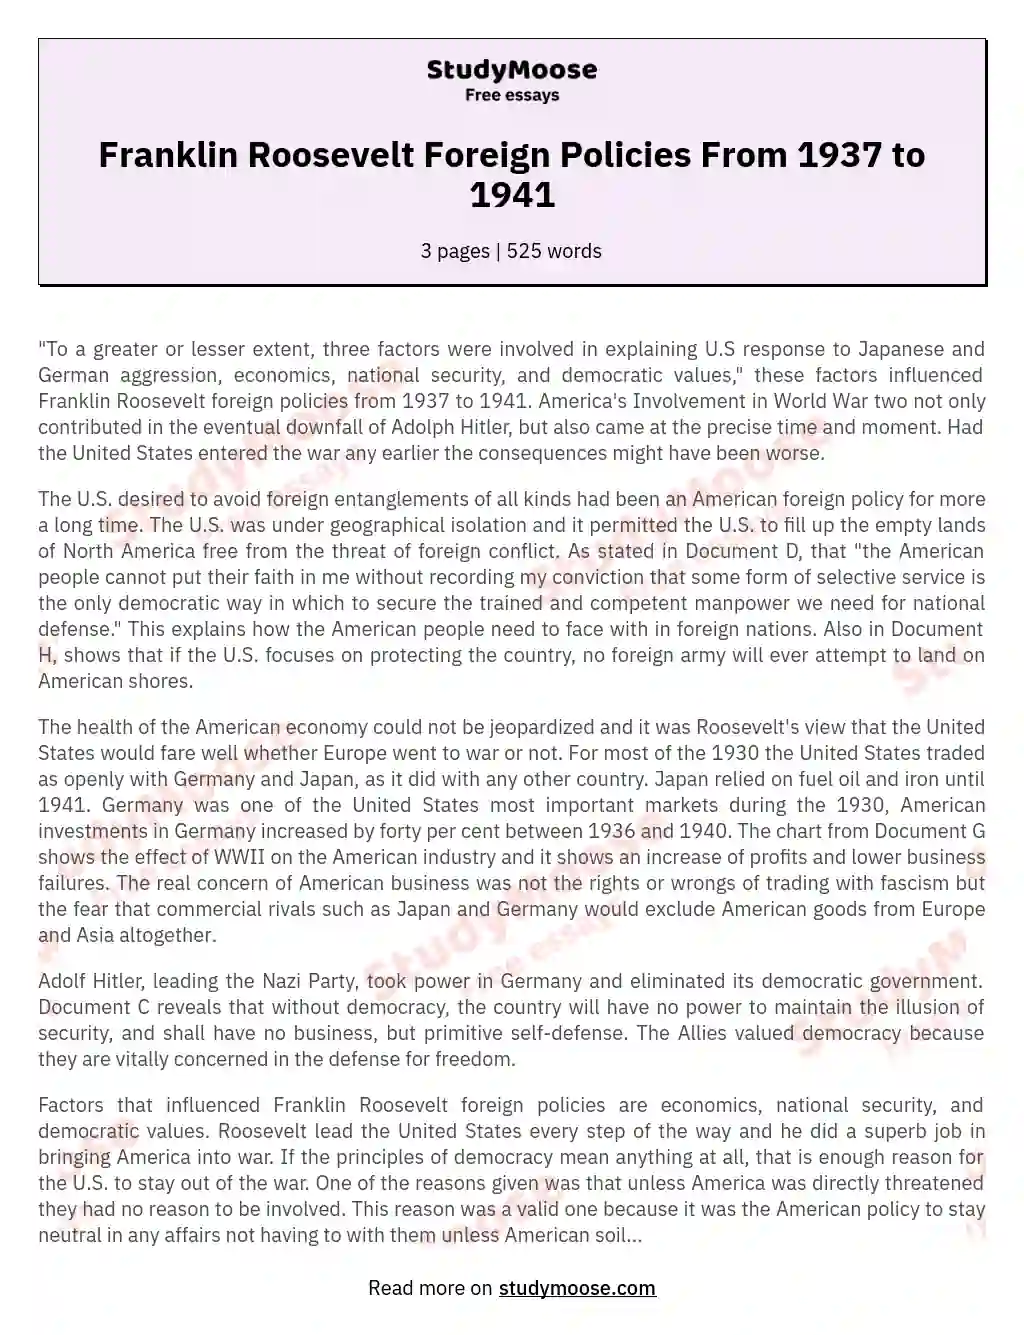 Franklin Roosevelt Foreign Policies From 1937 to 1941 essay